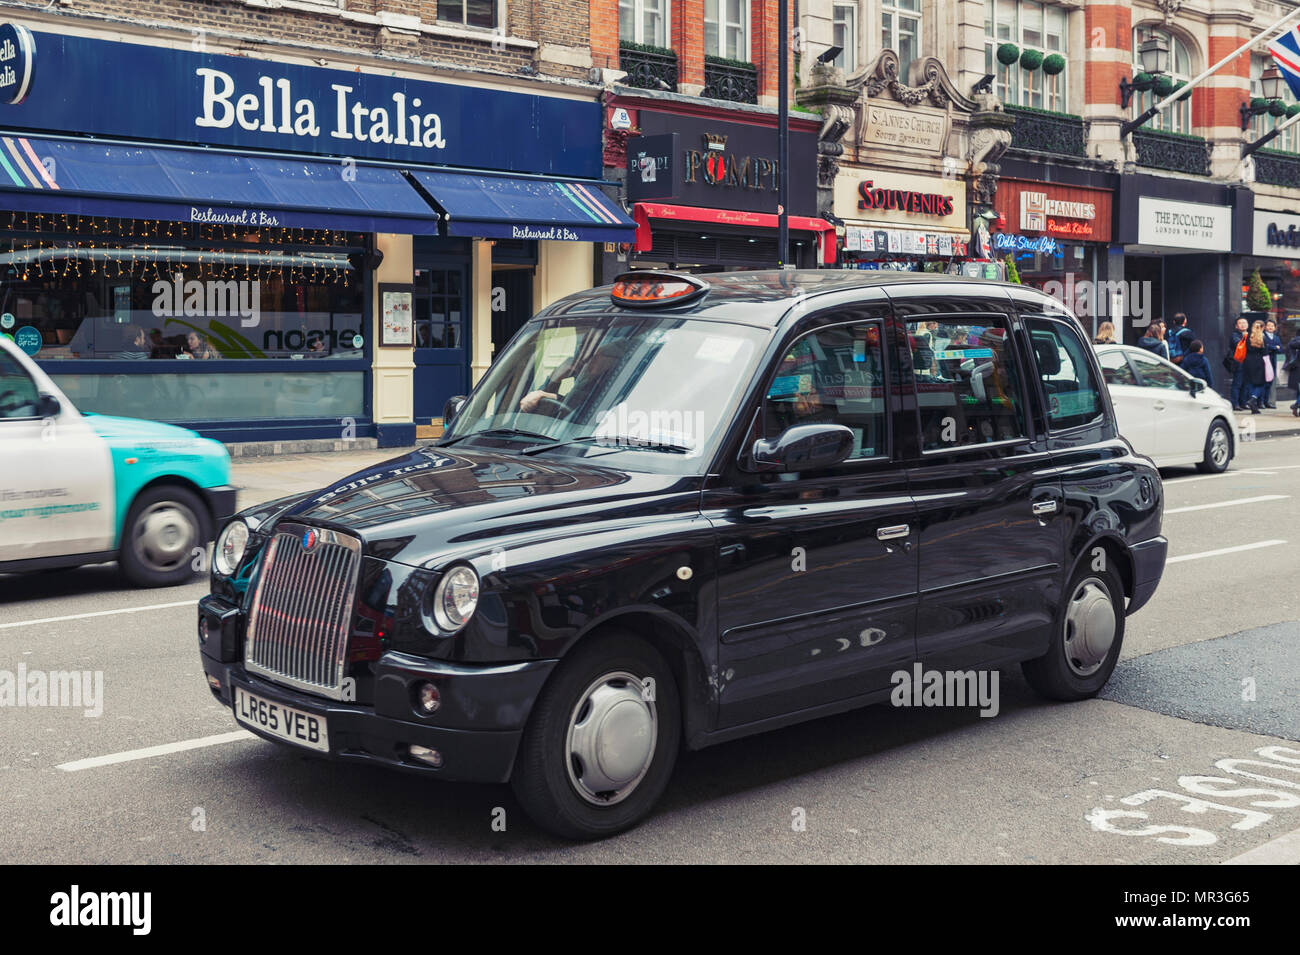 London, UK - April 2018: London taxi cab driven on Shaftesbury Avenue, a major street in the West End of London near Piccadilly Circus Stock Photo